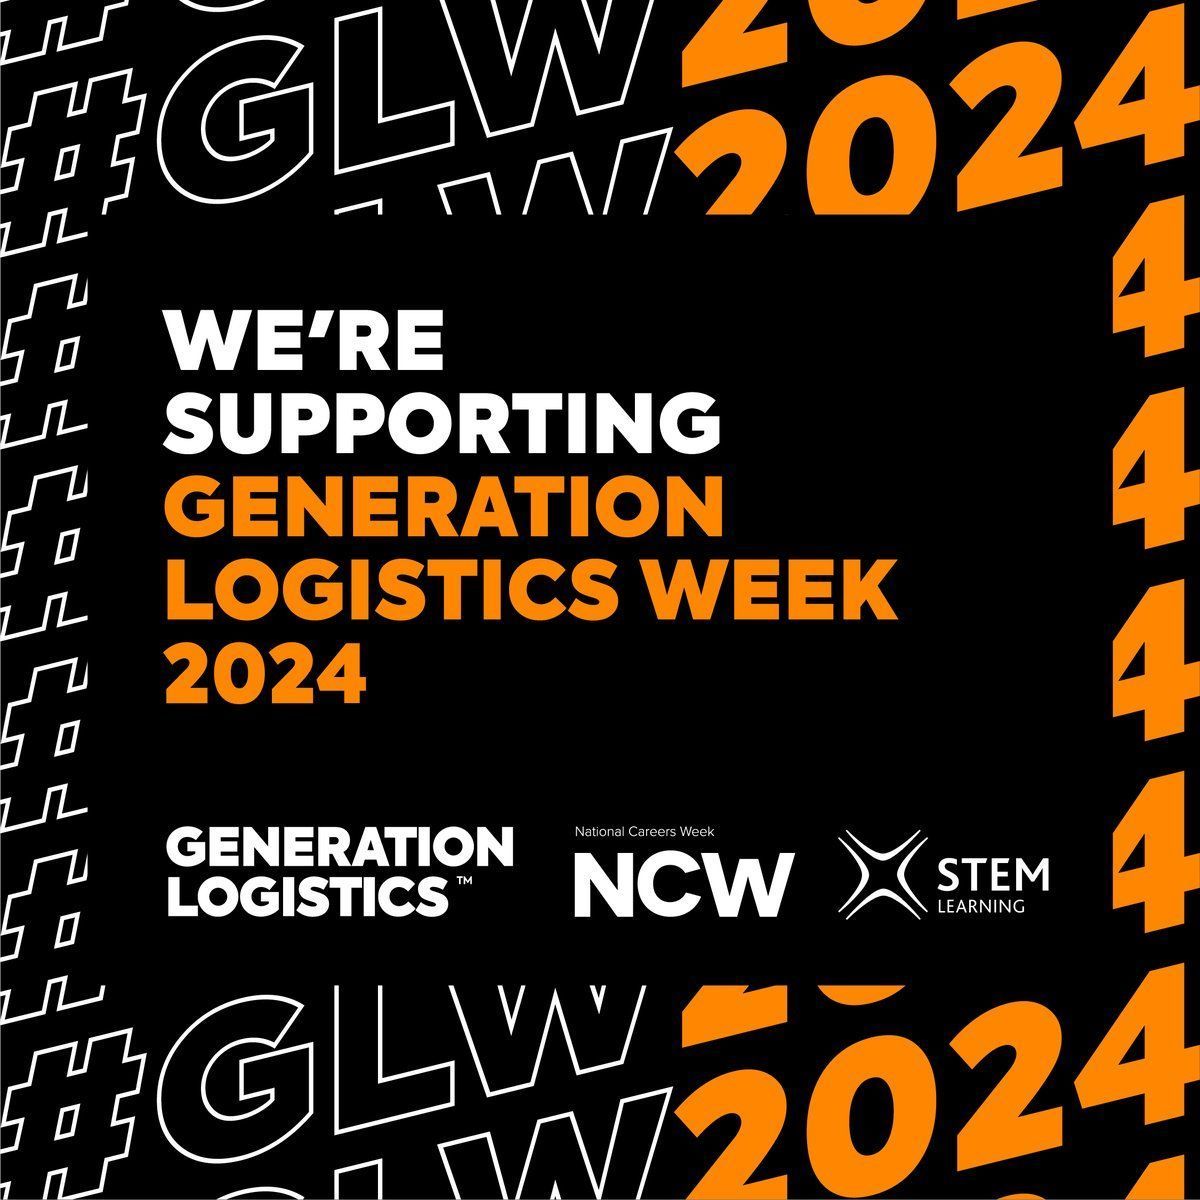 We're supporting 𝙂𝙀𝙉𝙀𝙍𝘼𝙏𝙄𝙊𝙉 𝙇𝙊𝙂𝙄𝙎𝙏𝙄𝘾𝙎 𝙒𝙀𝙀𝙆  

🗓️ 24th - 28th June.  

In partnership with @Gen_Logistics @STEMLearningUK

#GLW2024 

Find out more here 👇

buff.ly/3Q4s2ug